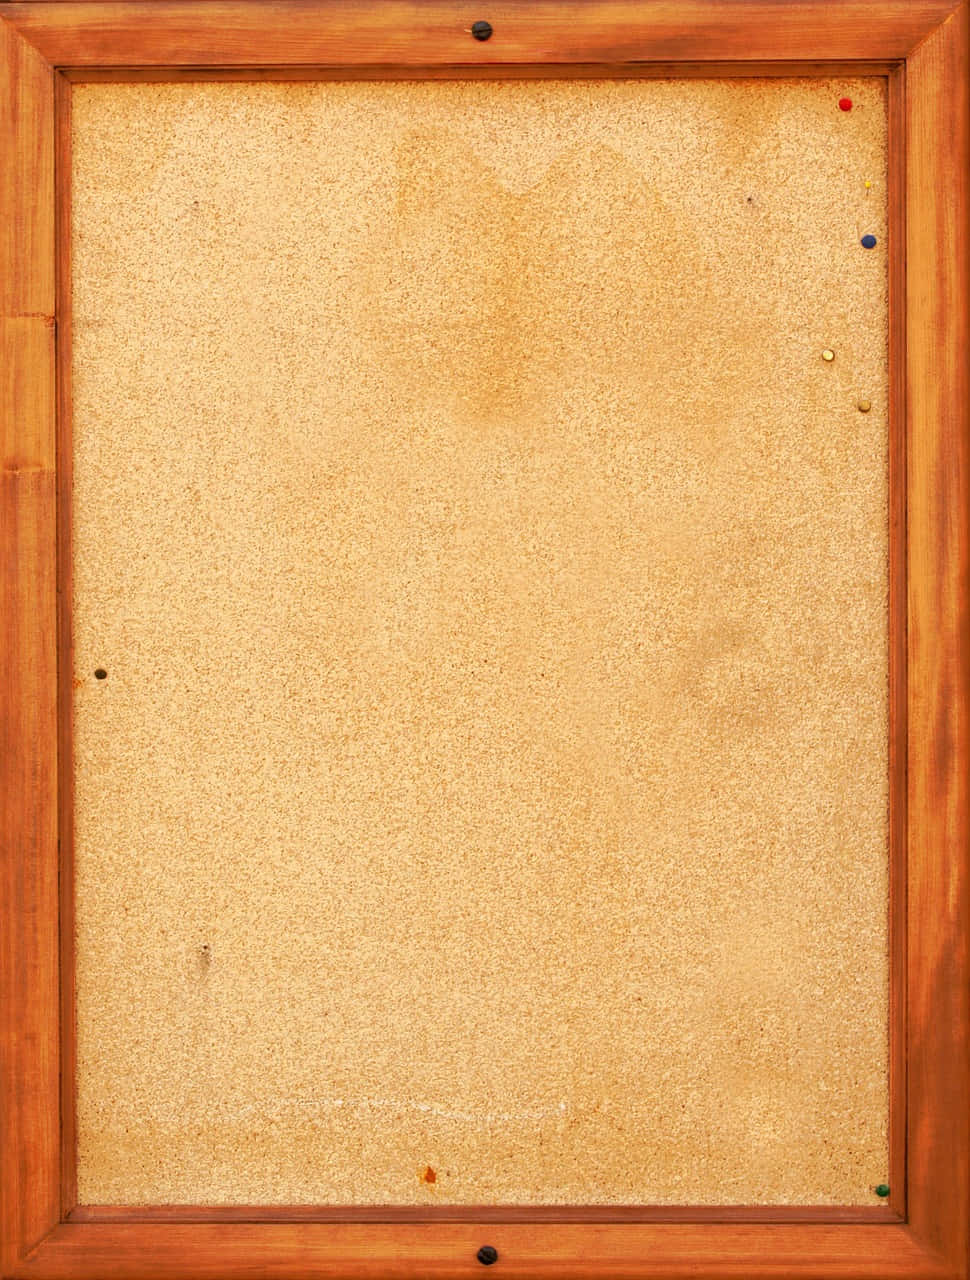 A Wooden Frame With A White Board